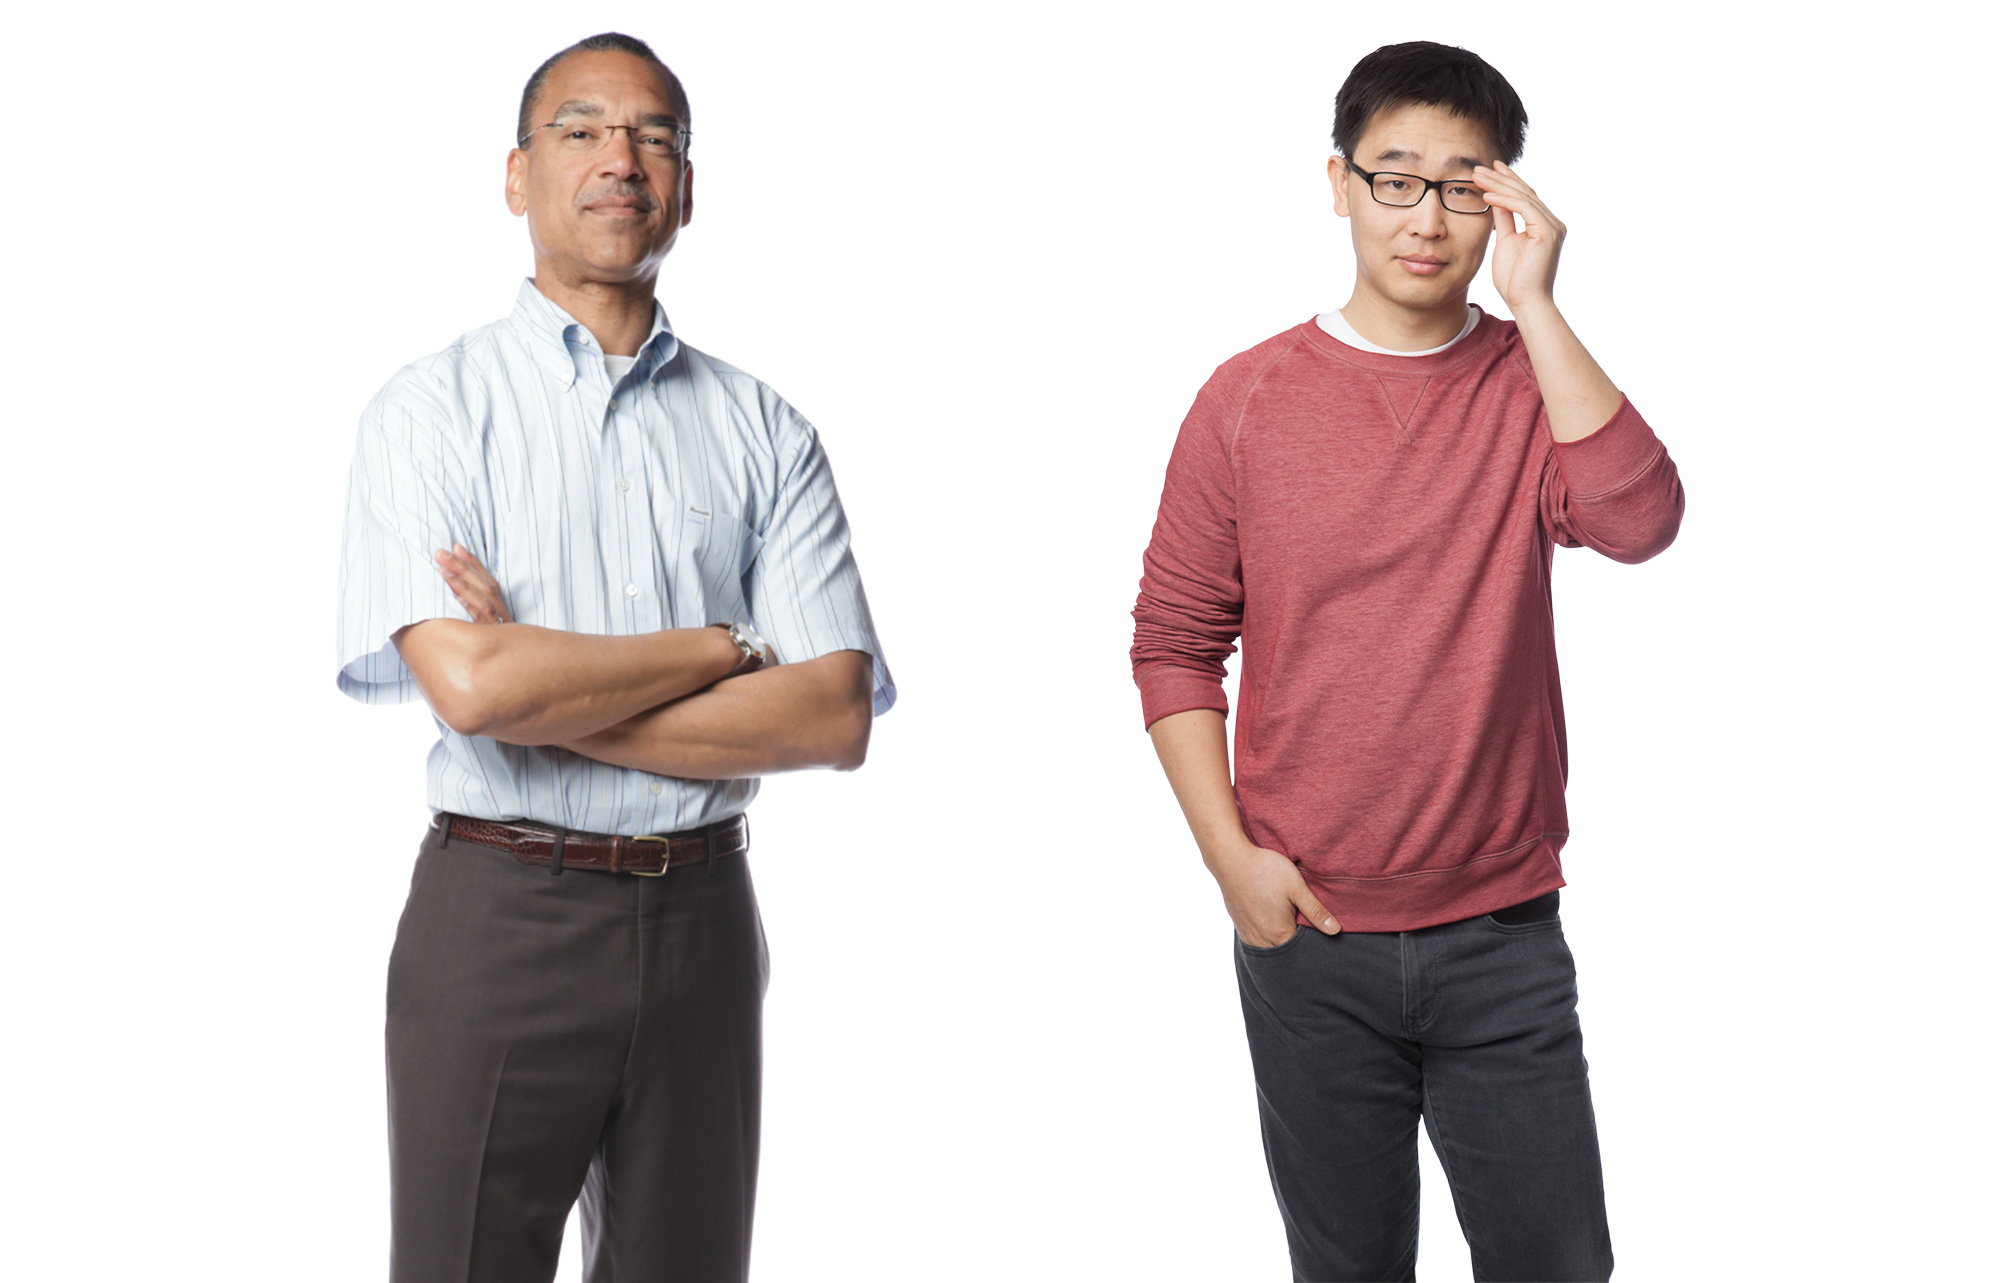 Portrait of two men. One, middle aged, looks confidently at the camera. The younger Asian man adjusts his glasses.